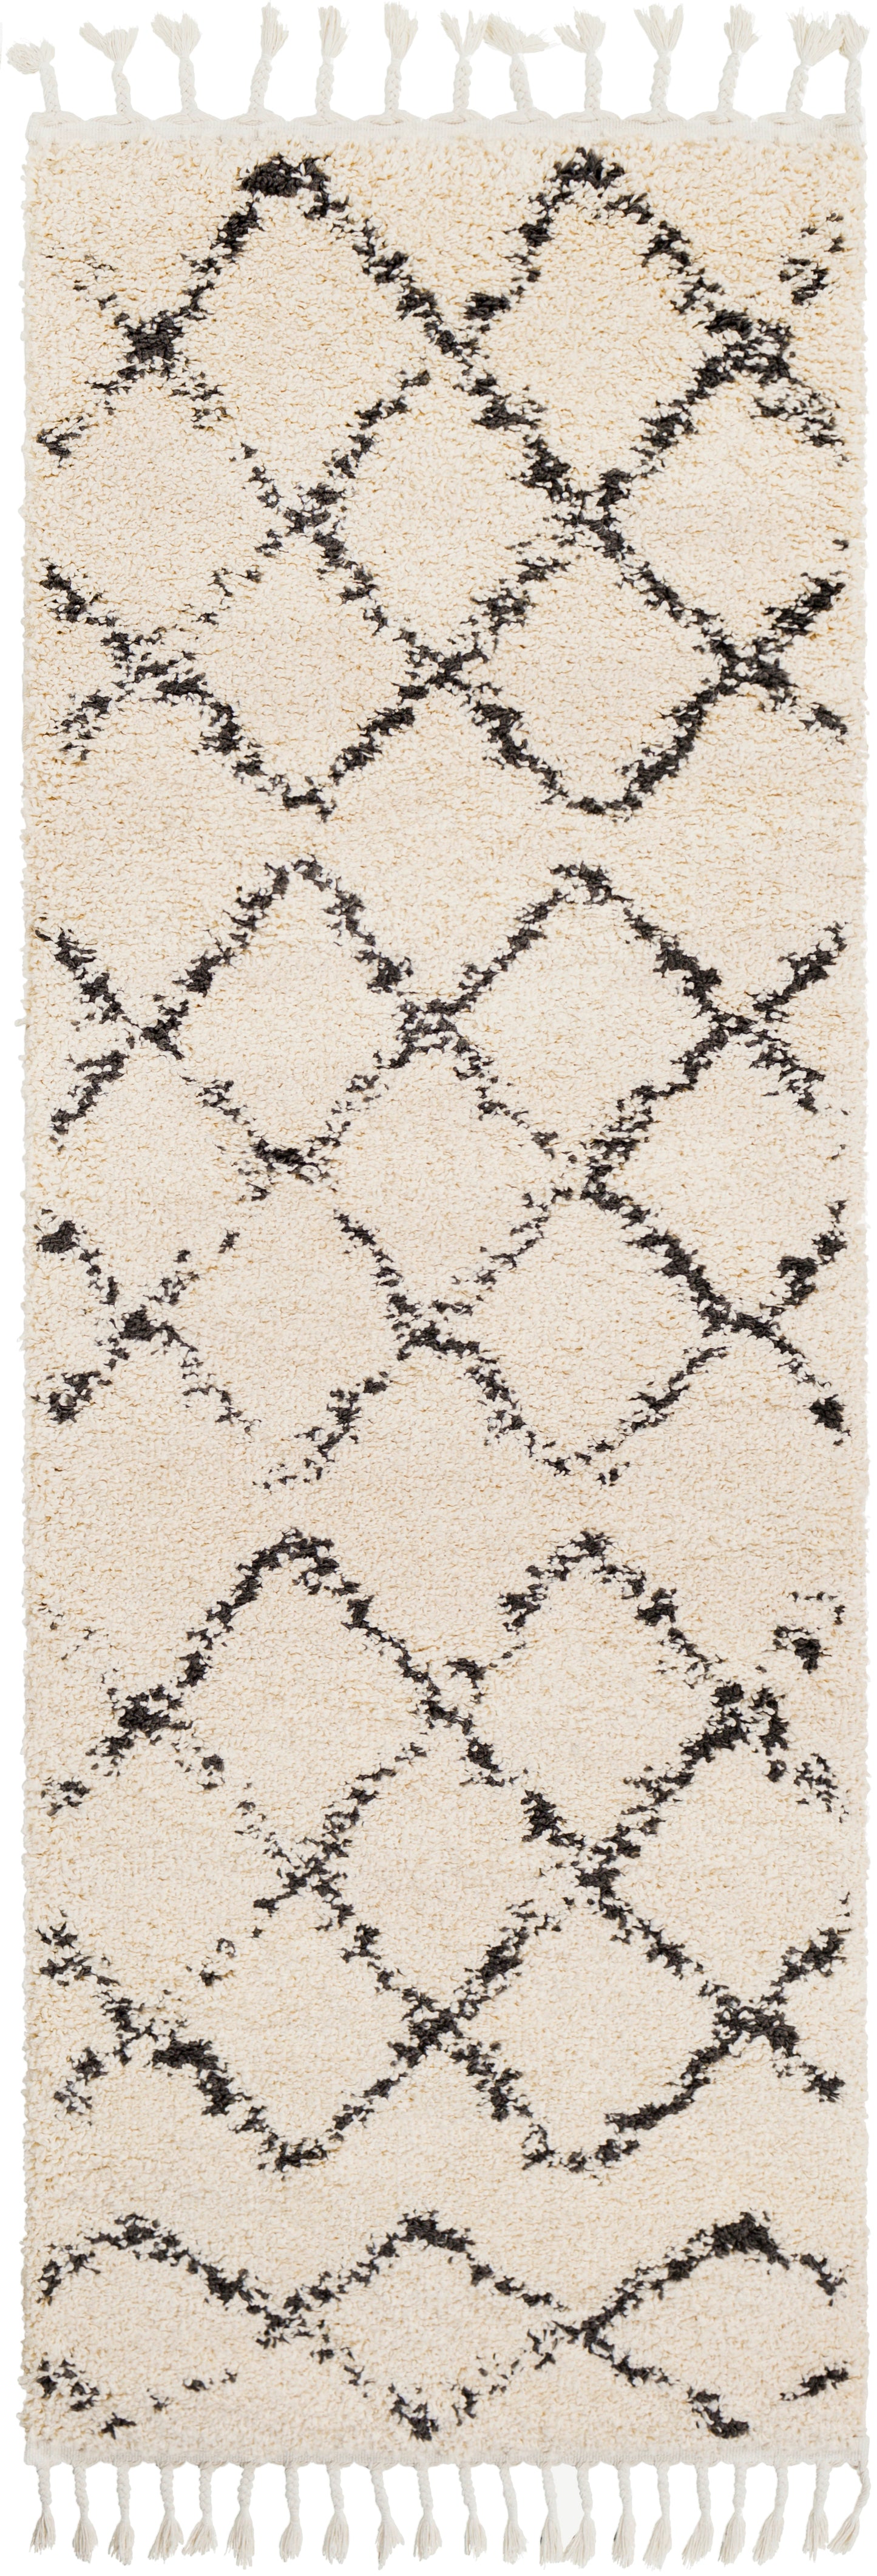 Berber Shag 21826 Machine Woven Synthetic Blend Indoor Area Rug by Surya Rugs